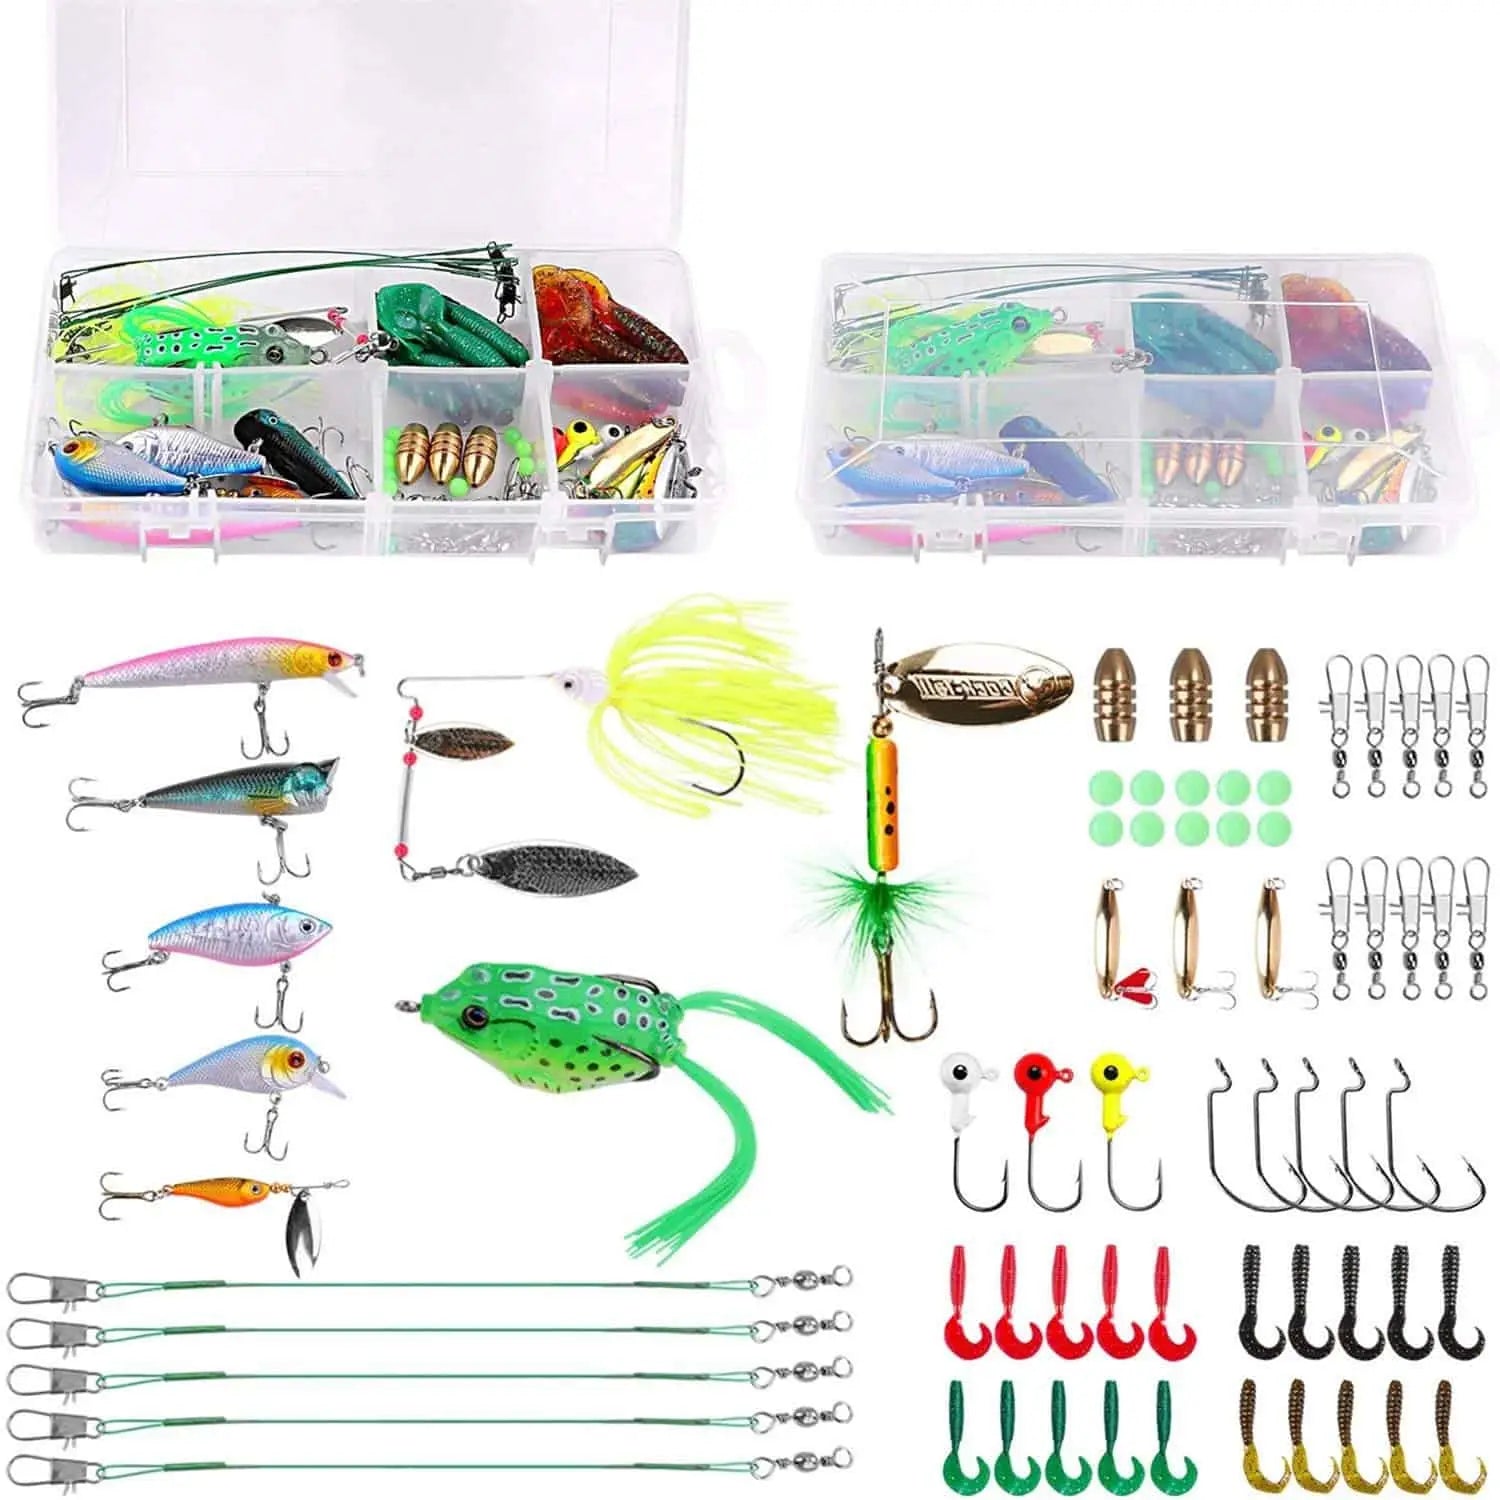 PLUSINNO Fishing Lures Baits Tackle Including Crankbaits, Spinnerbaits,  Plastic Worms, Jigs, Topwater Lures, Tackle Box and More Fishing Gear Lures  Kit Set, 210/189Pcs Fishing Lure Tackle 210PCS Fishing Lure